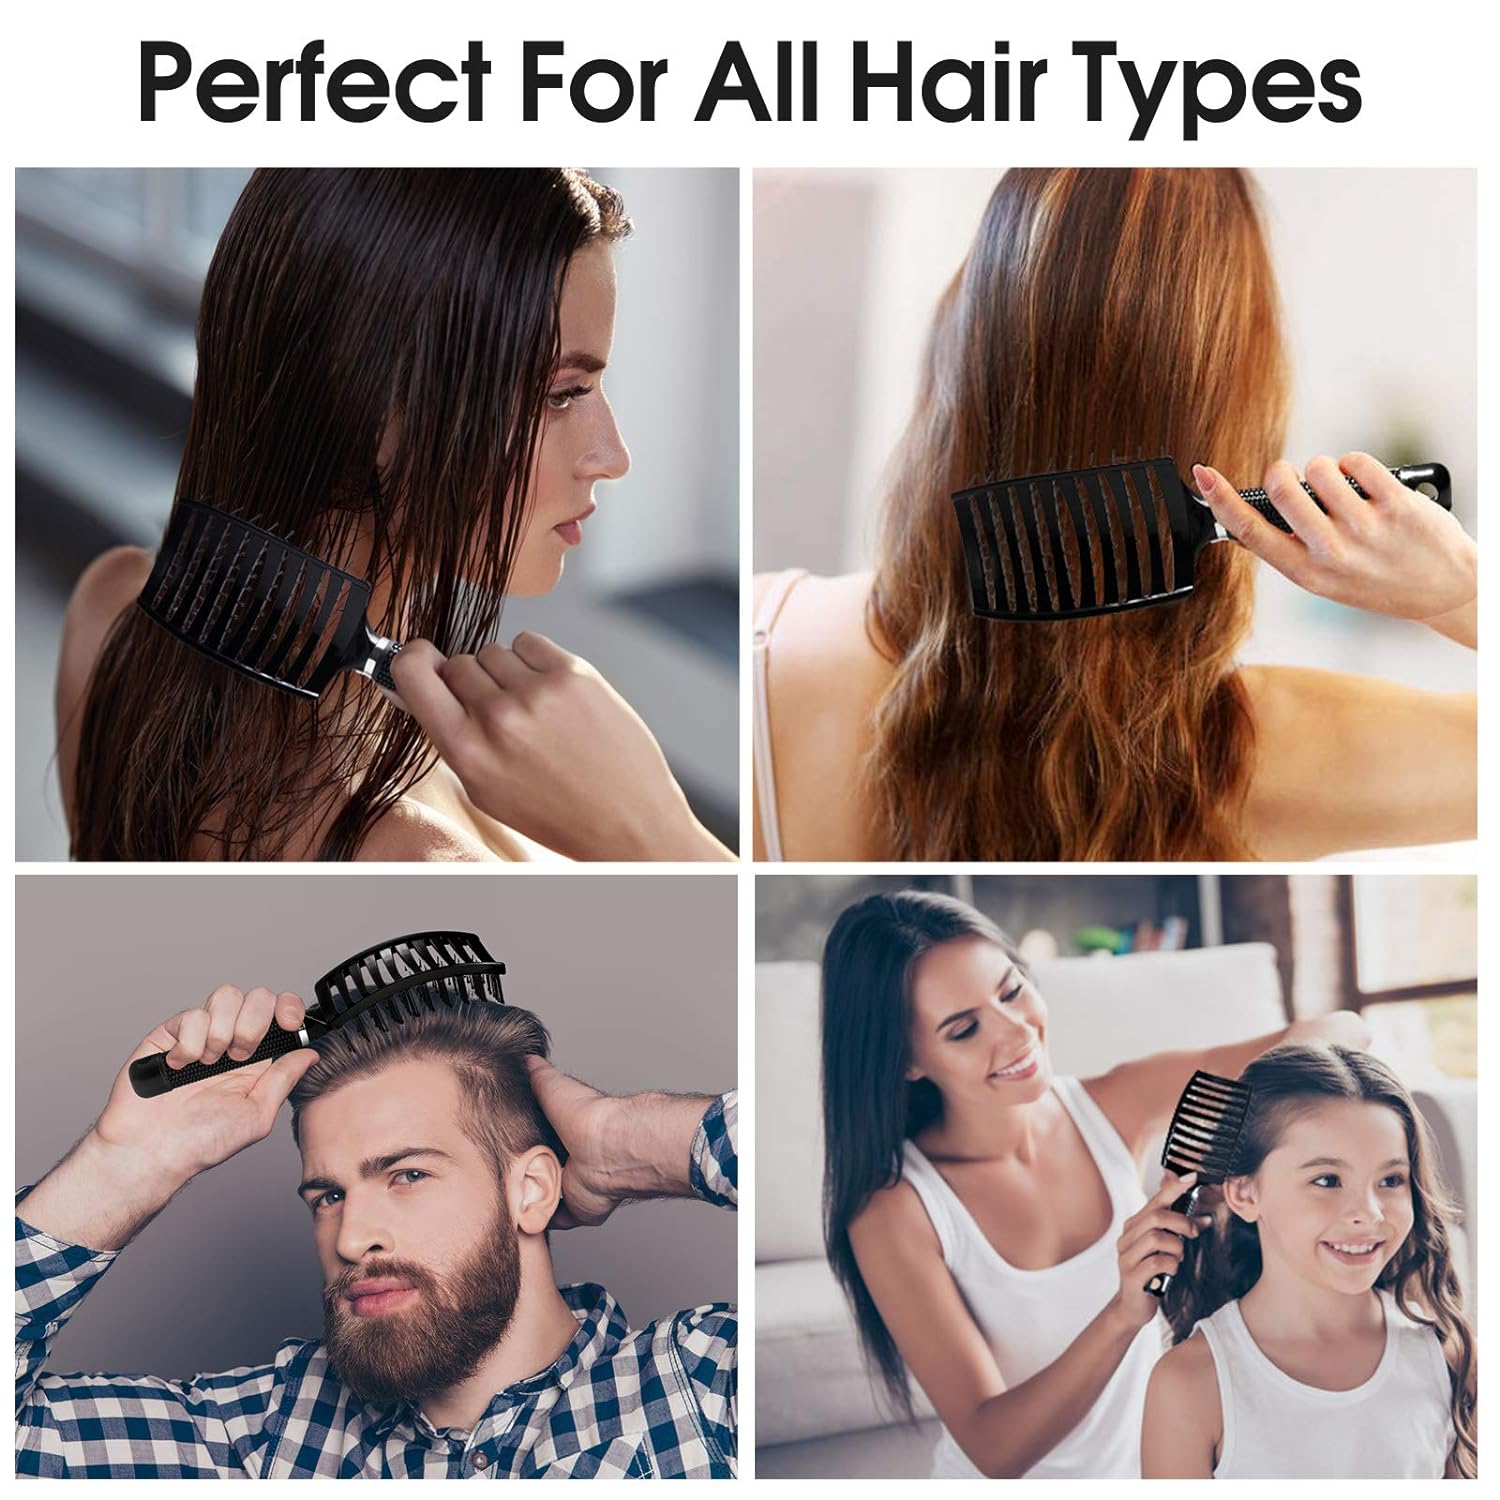 Professional curved vented hairbrush designed for less hair shedding, suitable for both men and women. This paddle brush is perfect for detangling wet or dry curly, thick, and straight hair.